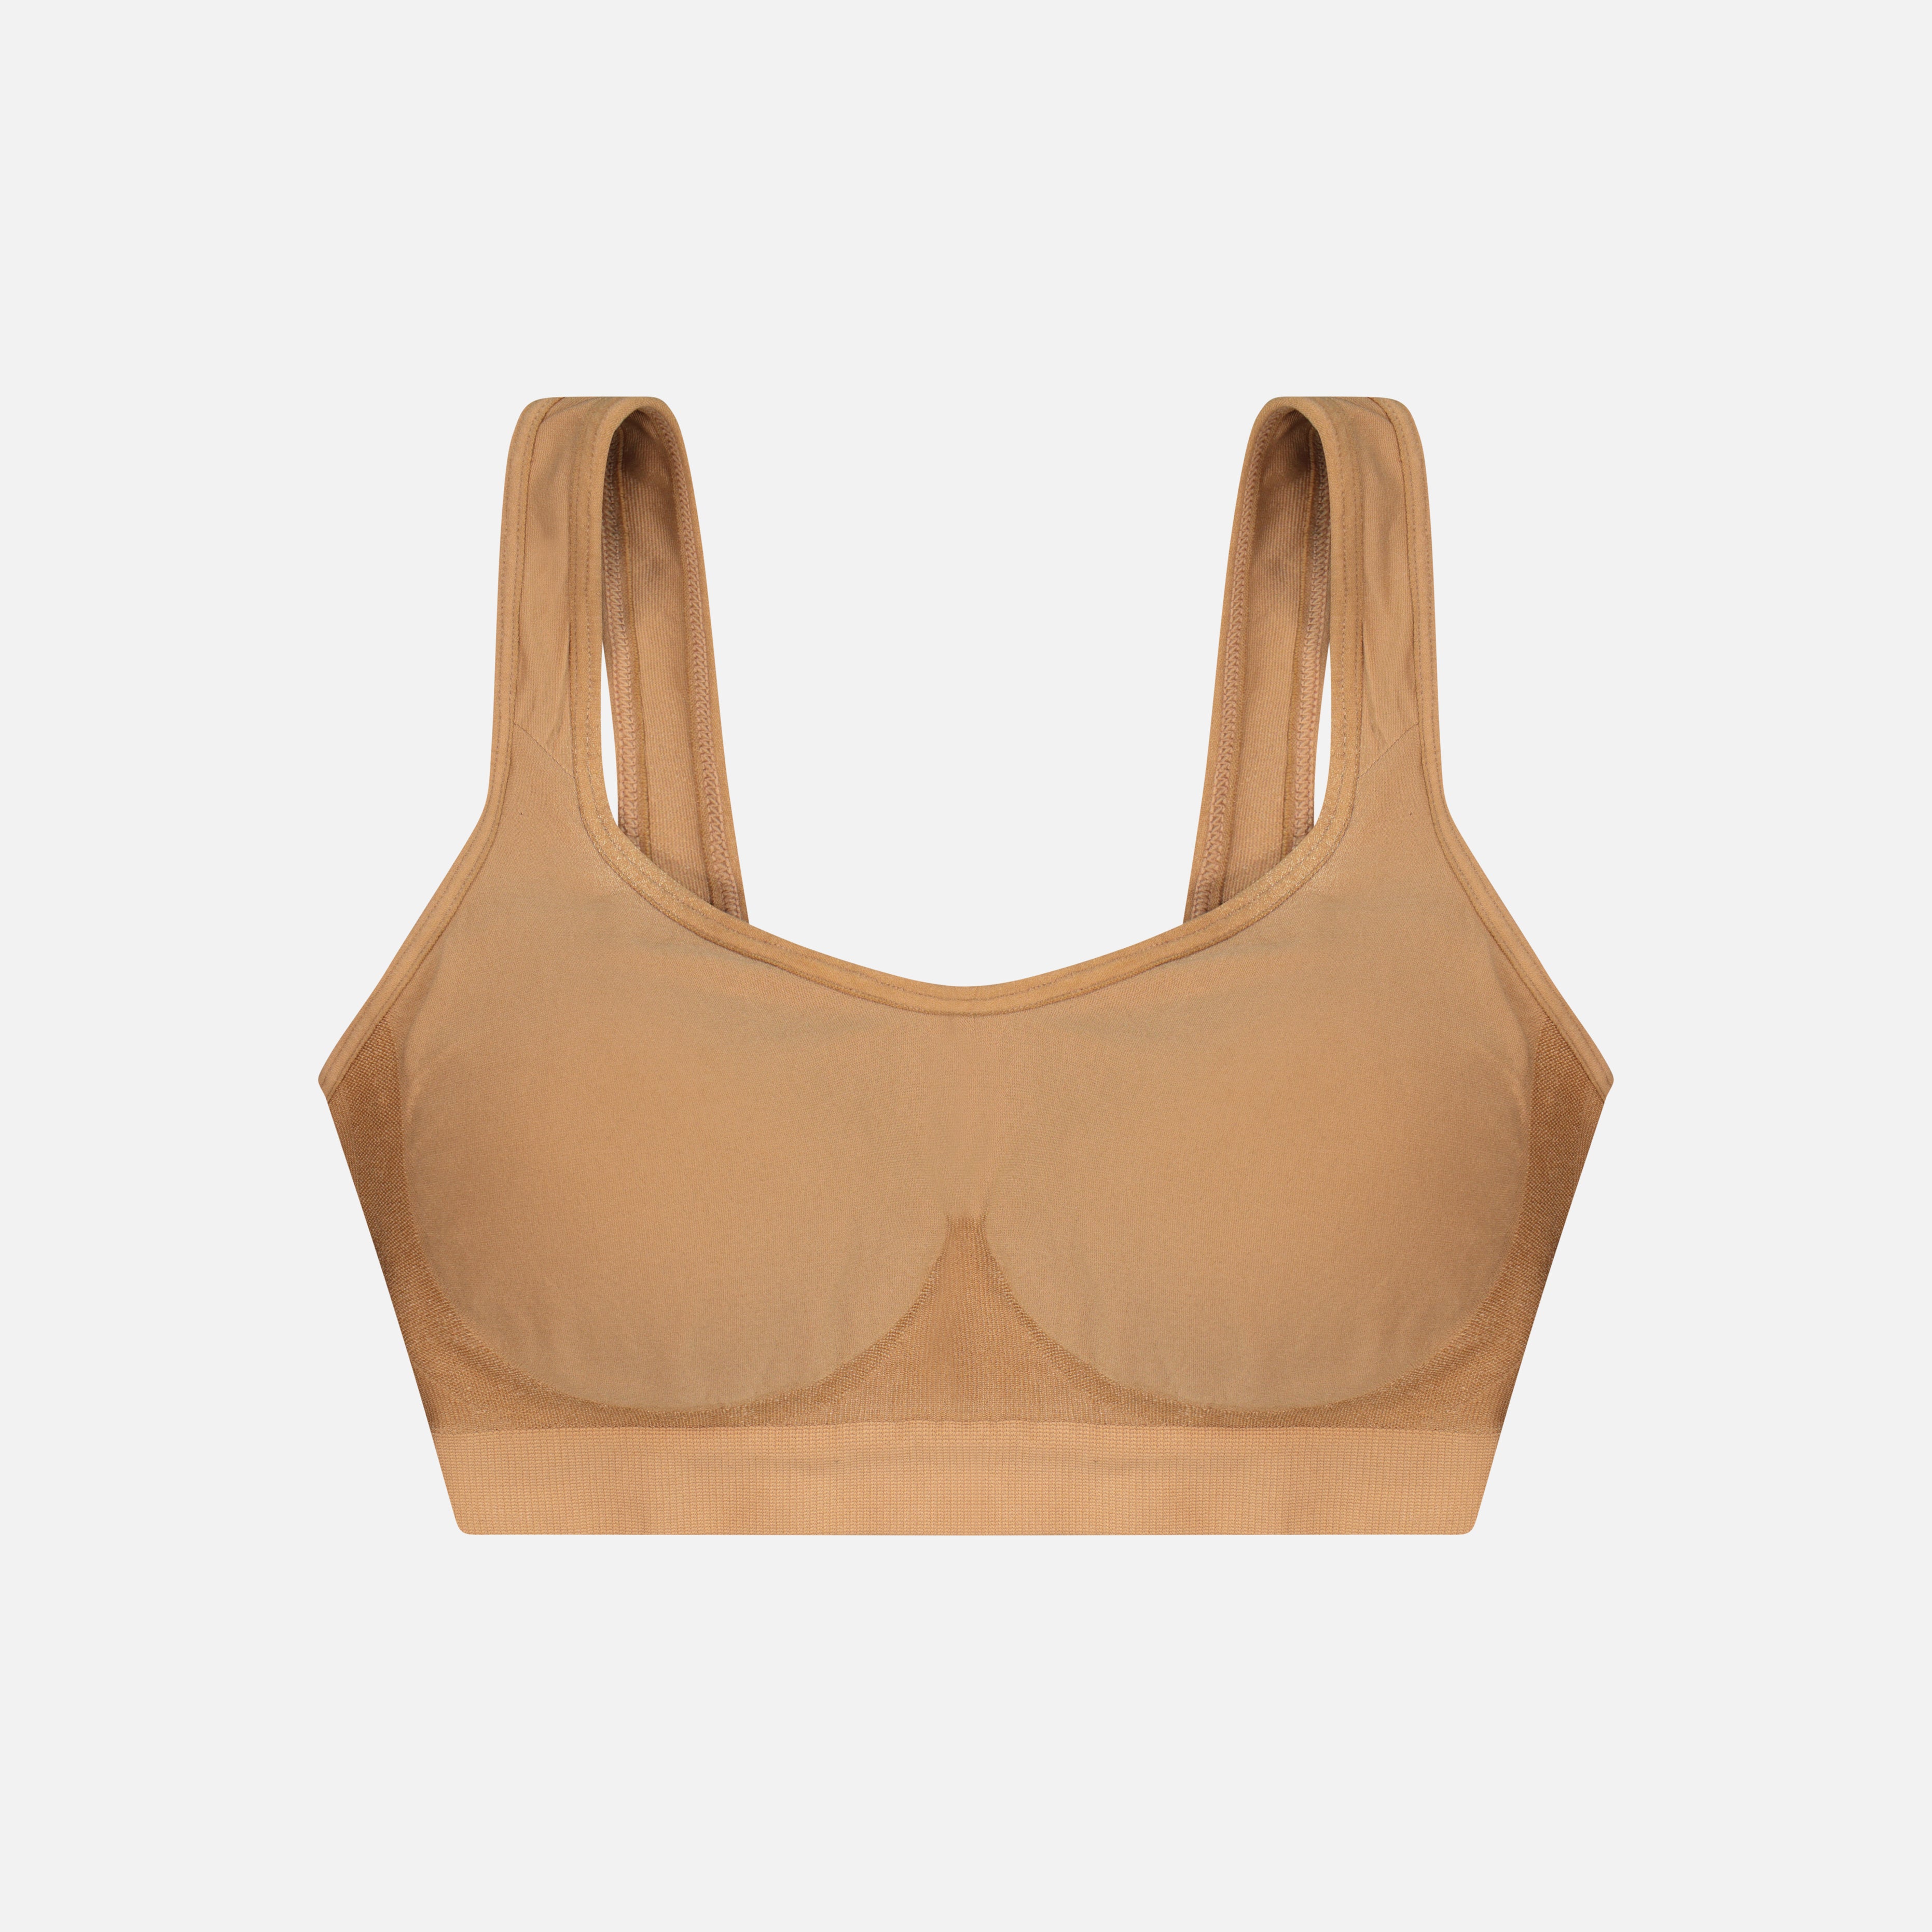 𝗝𝗨𝗦𝗧 𝗗𝗥𝗢𝗣𝗣𝗘𝗗: Our #1 BRA in a NEW color🍇 - Underoutfit